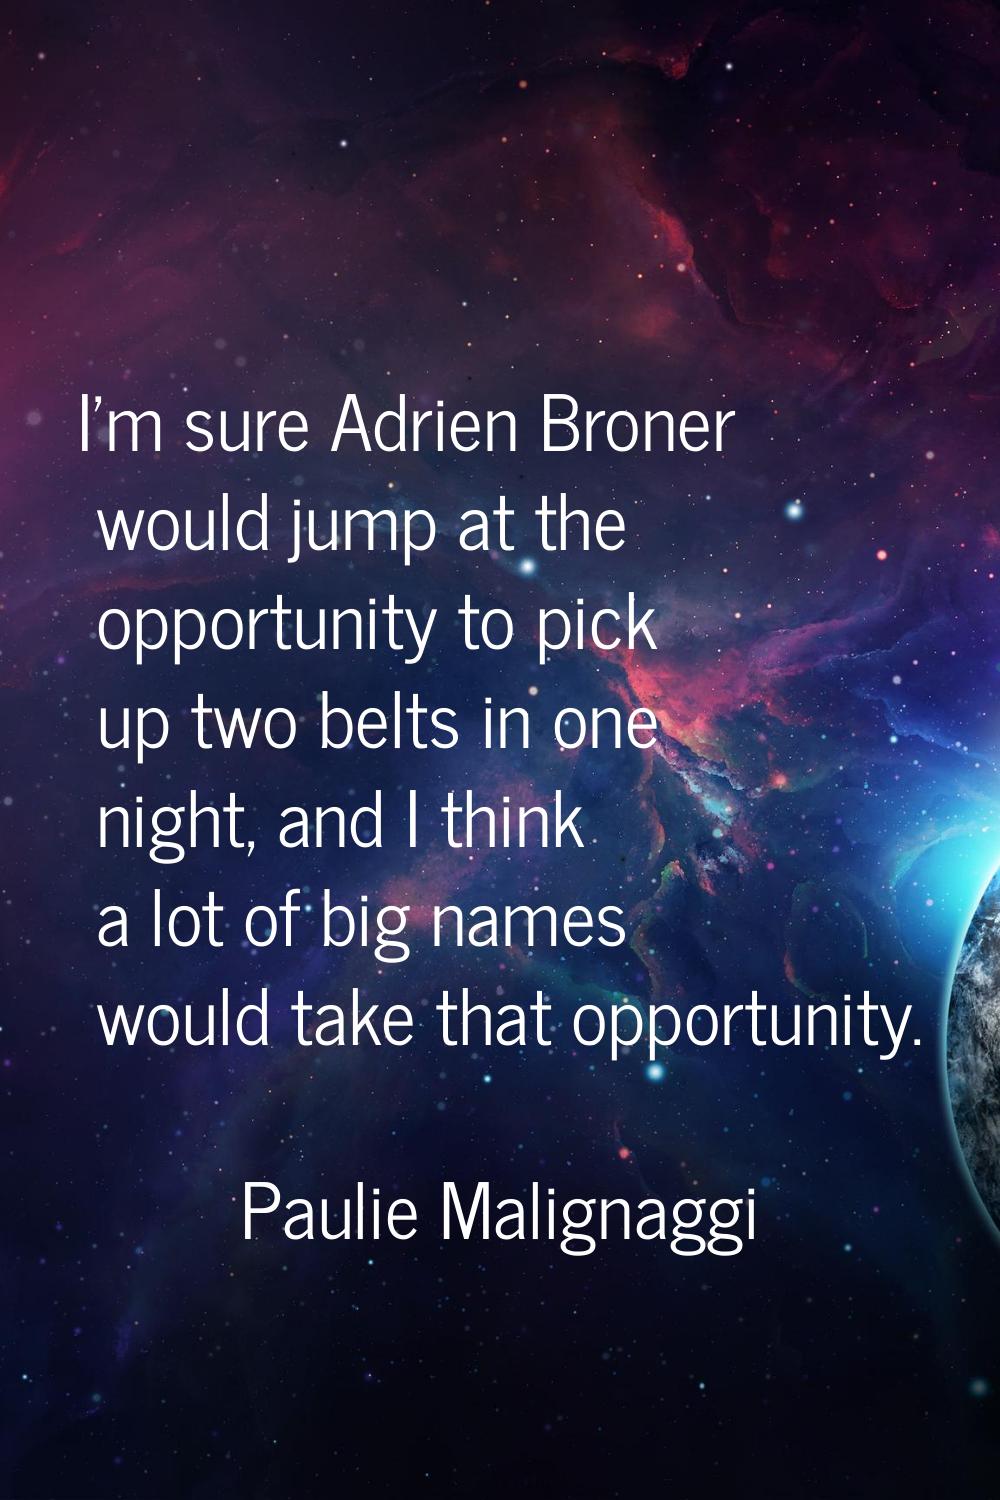 I'm sure Adrien Broner would jump at the opportunity to pick up two belts in one night, and I think